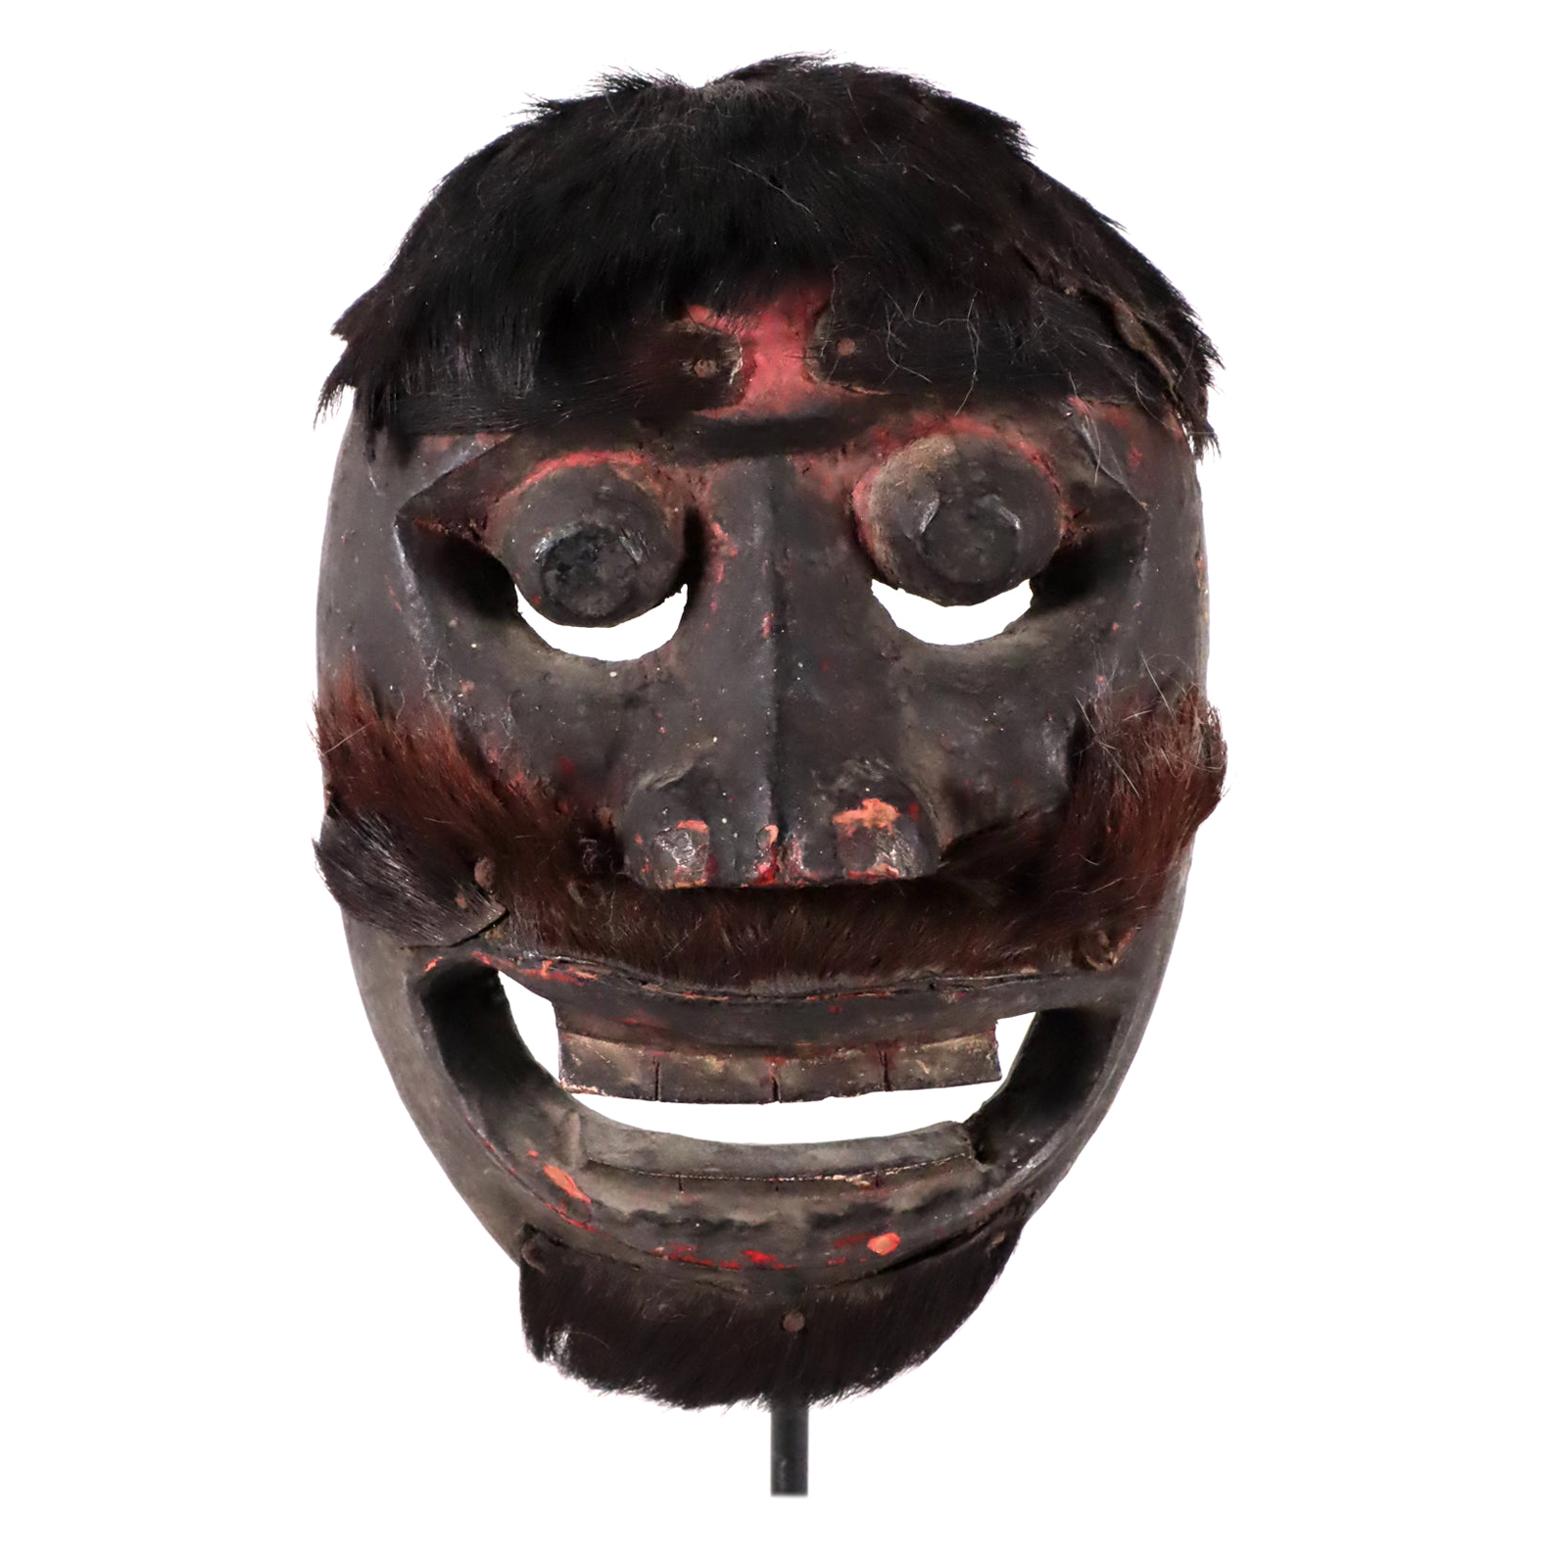 Wood and Hair Mask from Tribal Indonesia Probably Bali or Lombok Oceanic Art For Sale